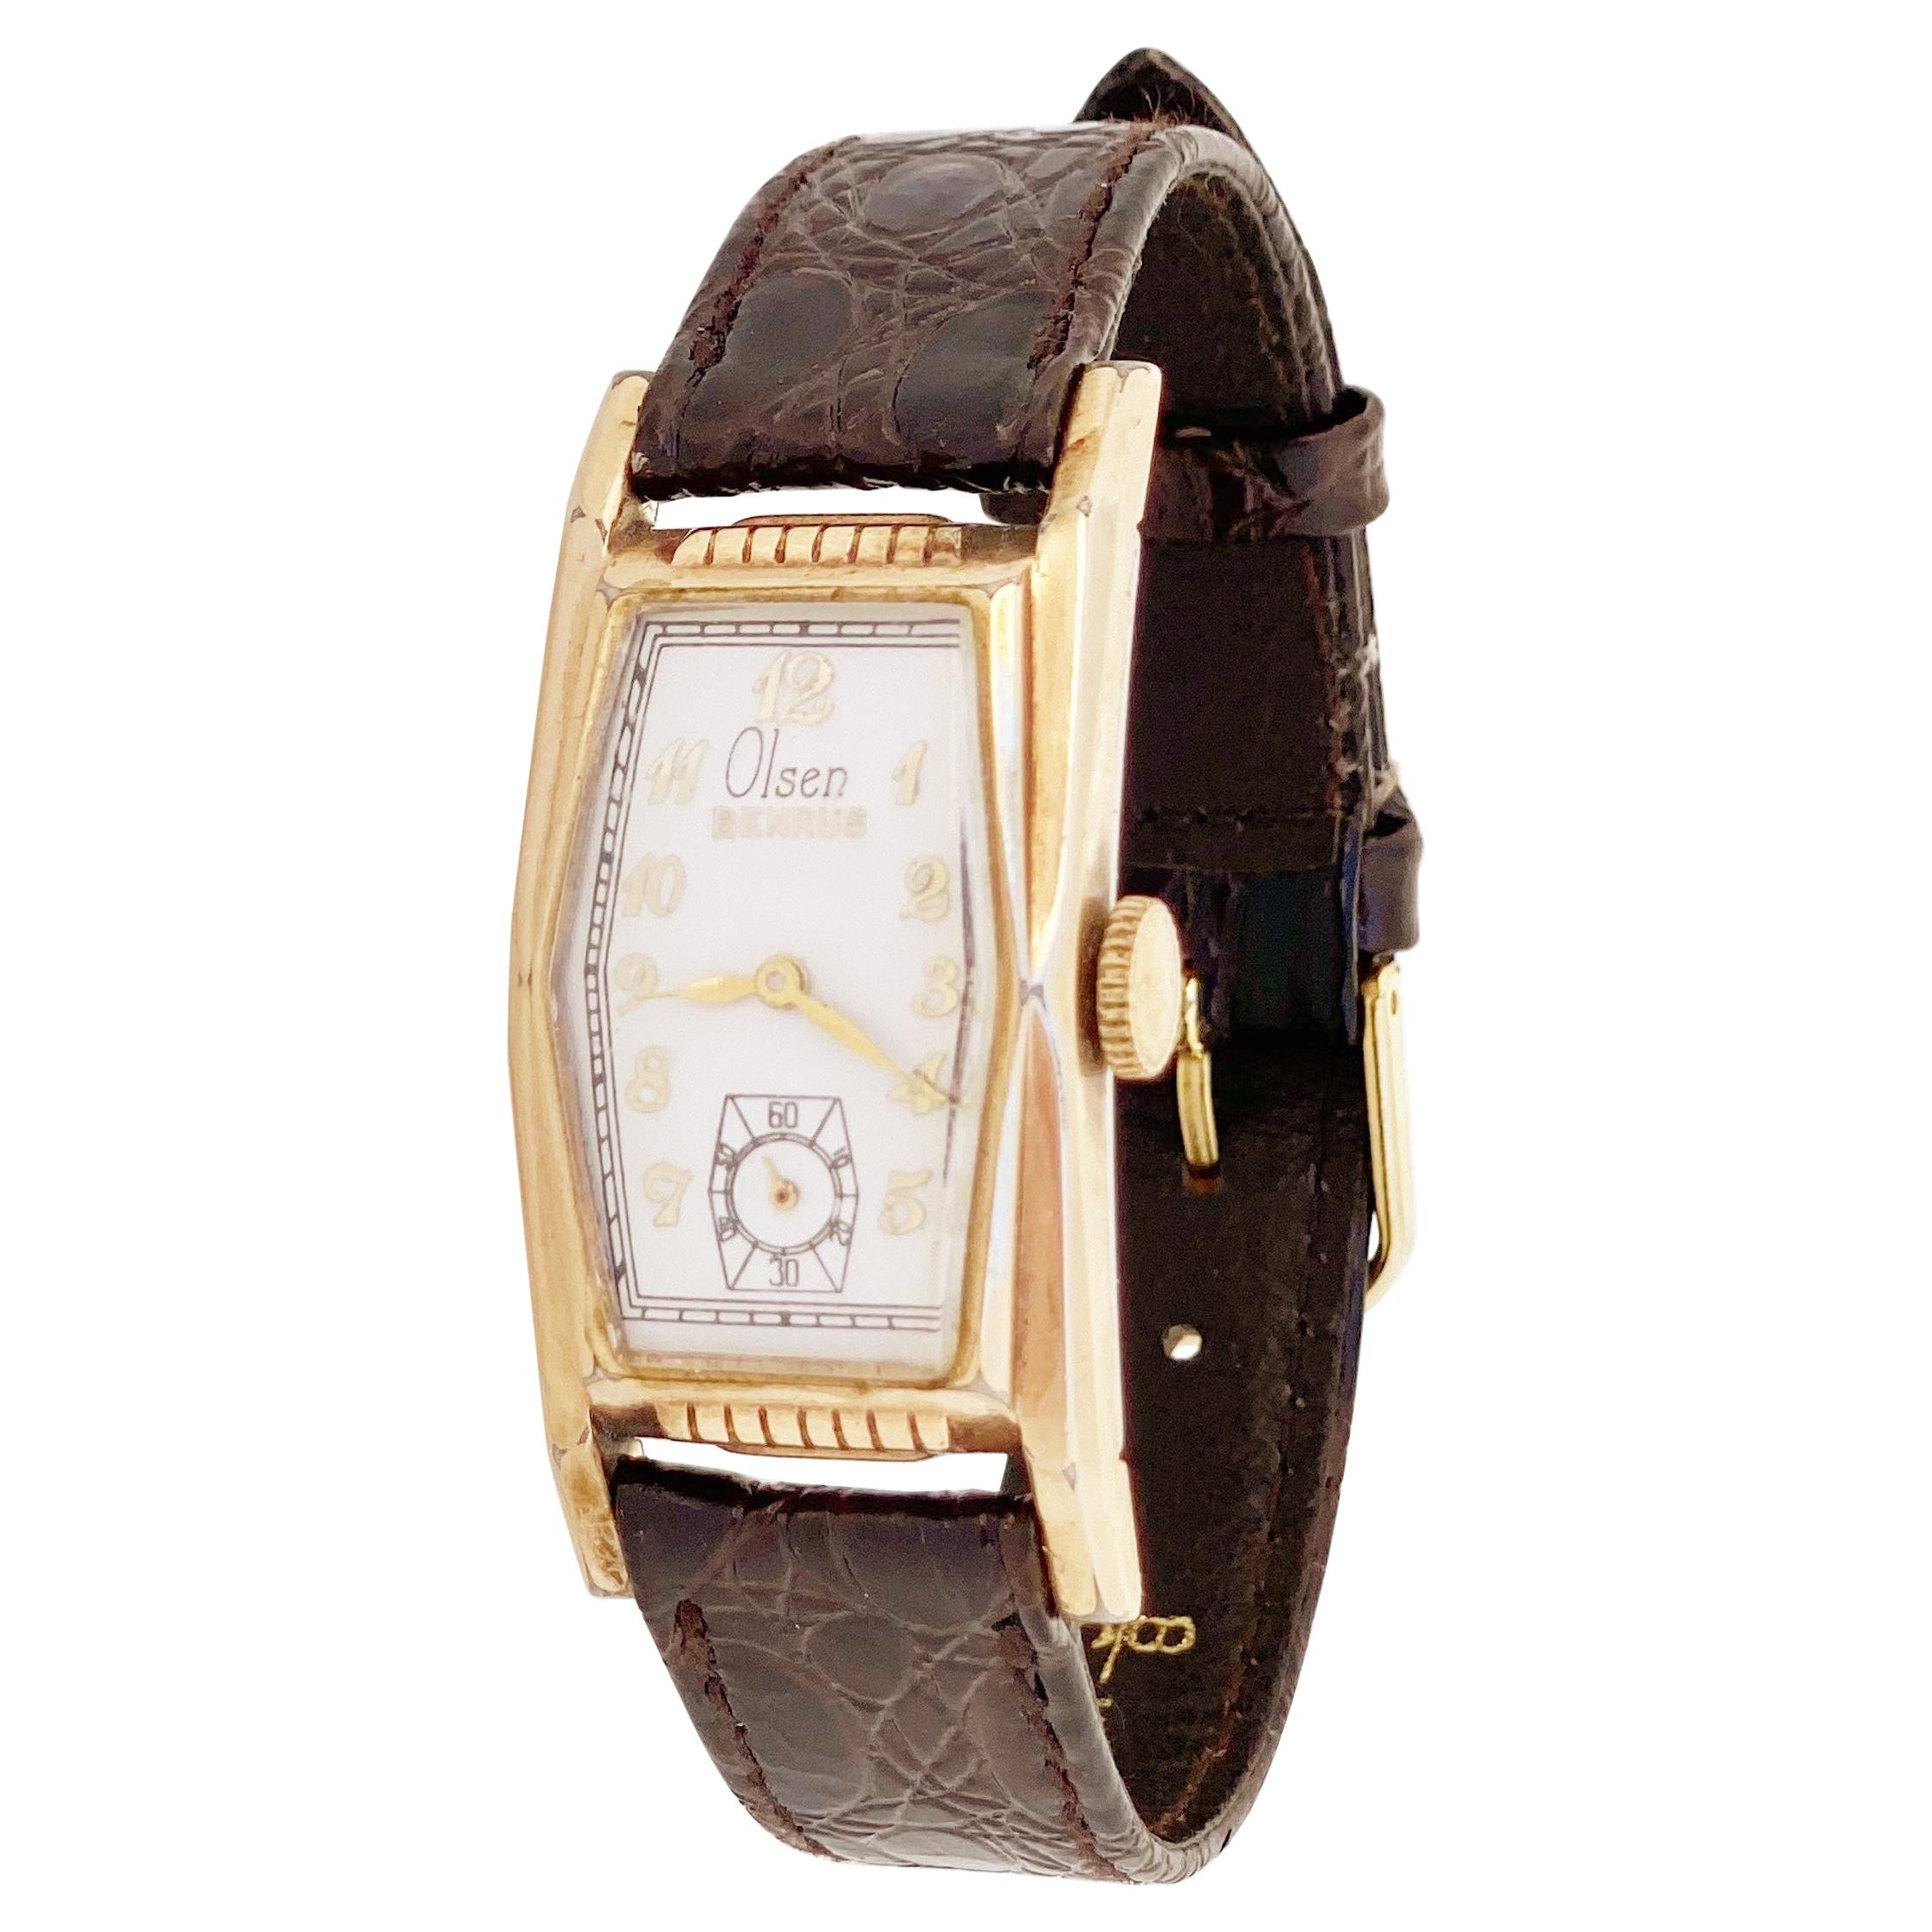 Rectangular Art Deco Style "Olsen" Watch with Leather Strap by Benrus, 1930s